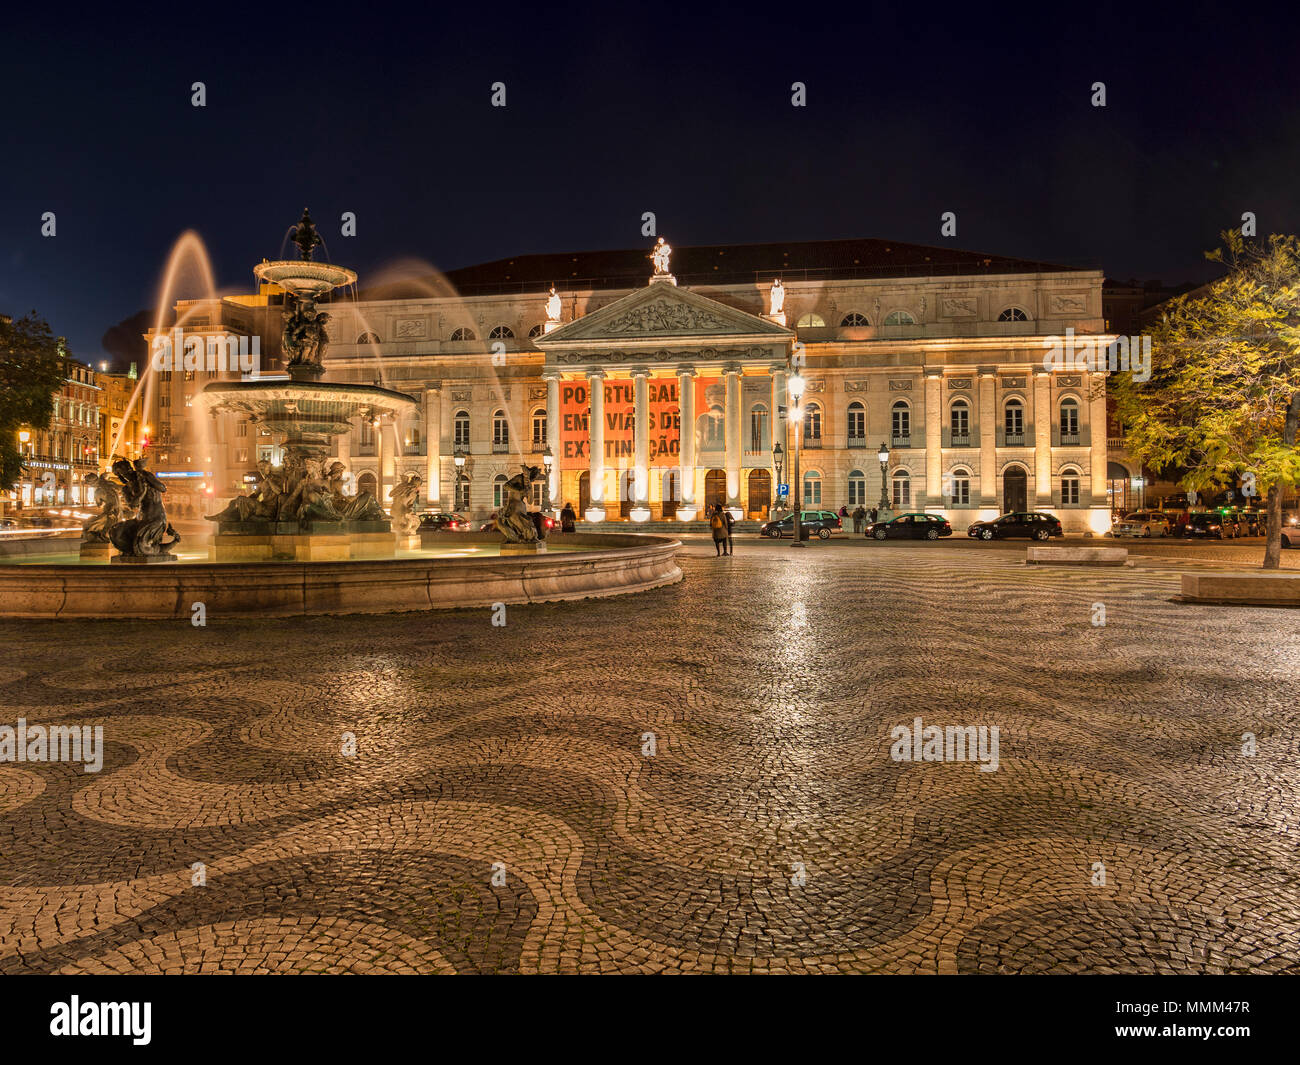 6 March 2018: Lisbon, Portugal - Rossio Square by night. Stock Photo